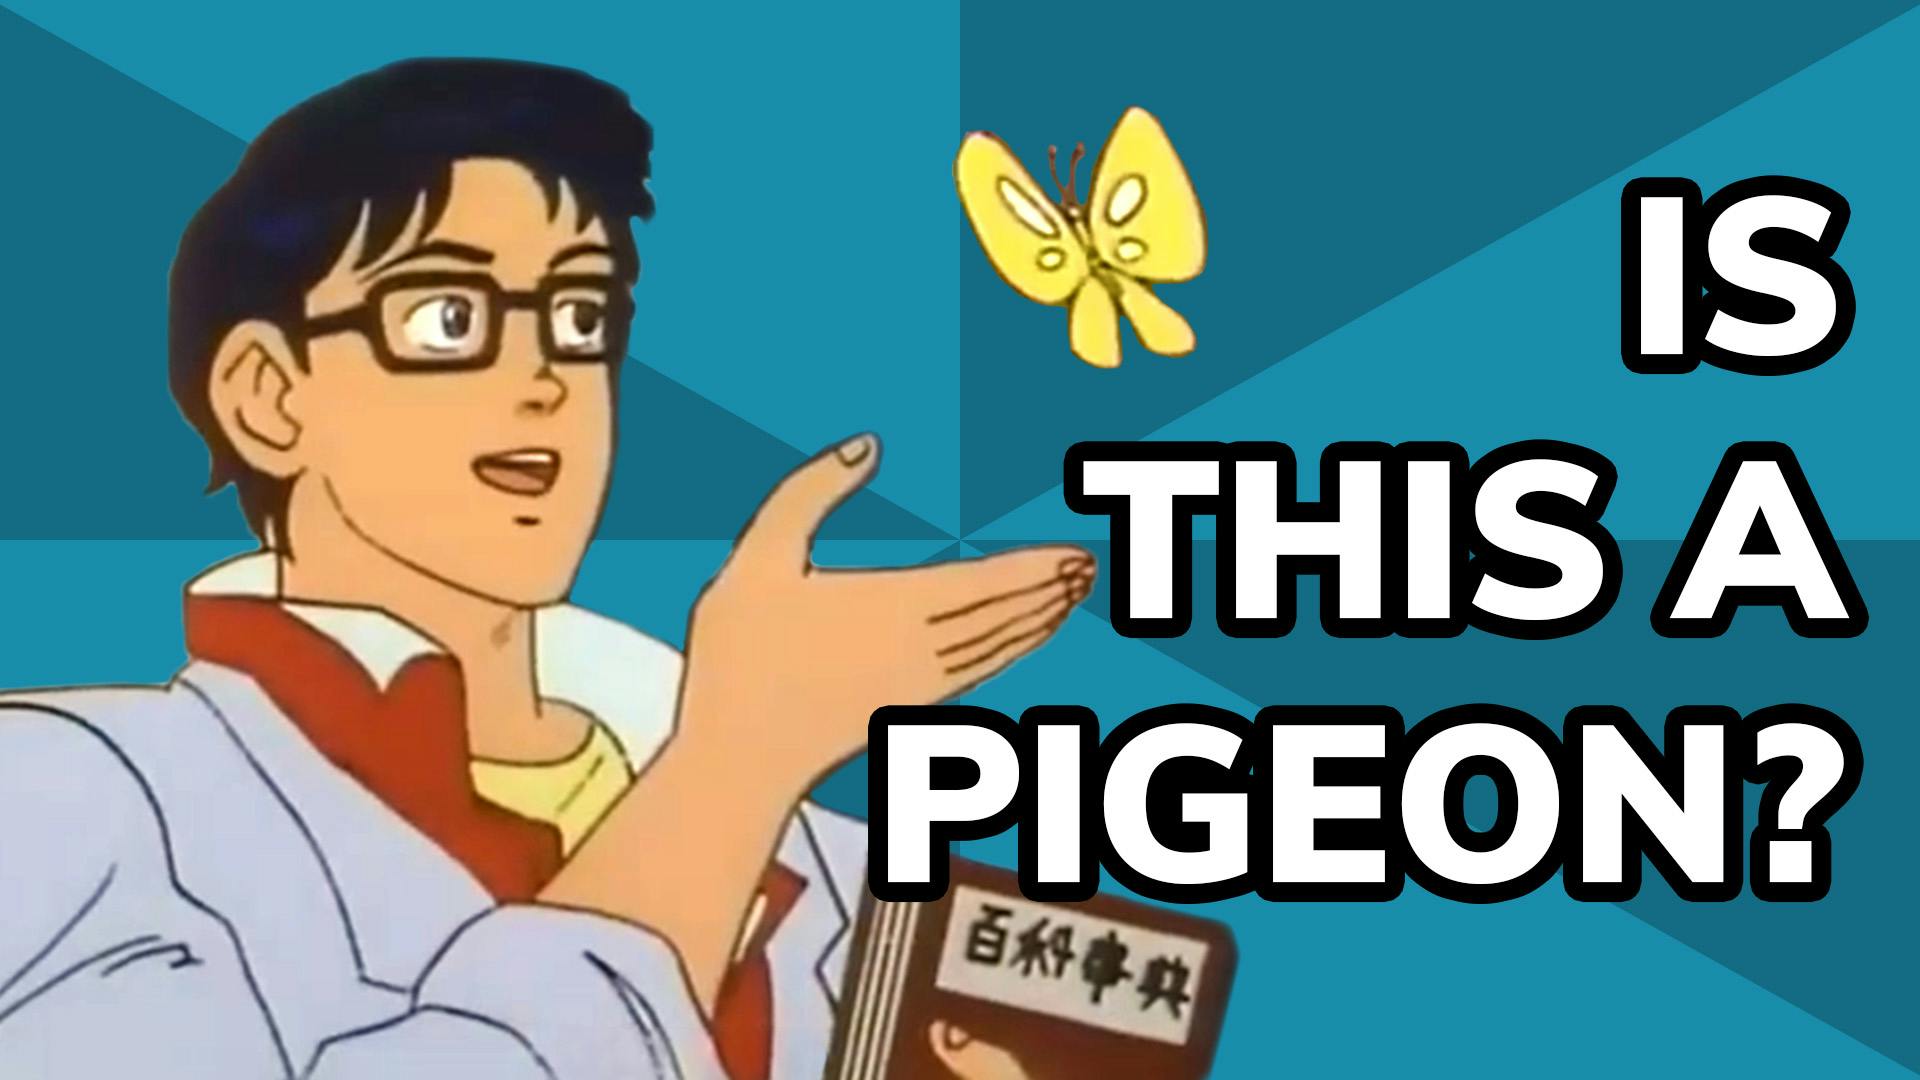 Is This A Pigeon? meme